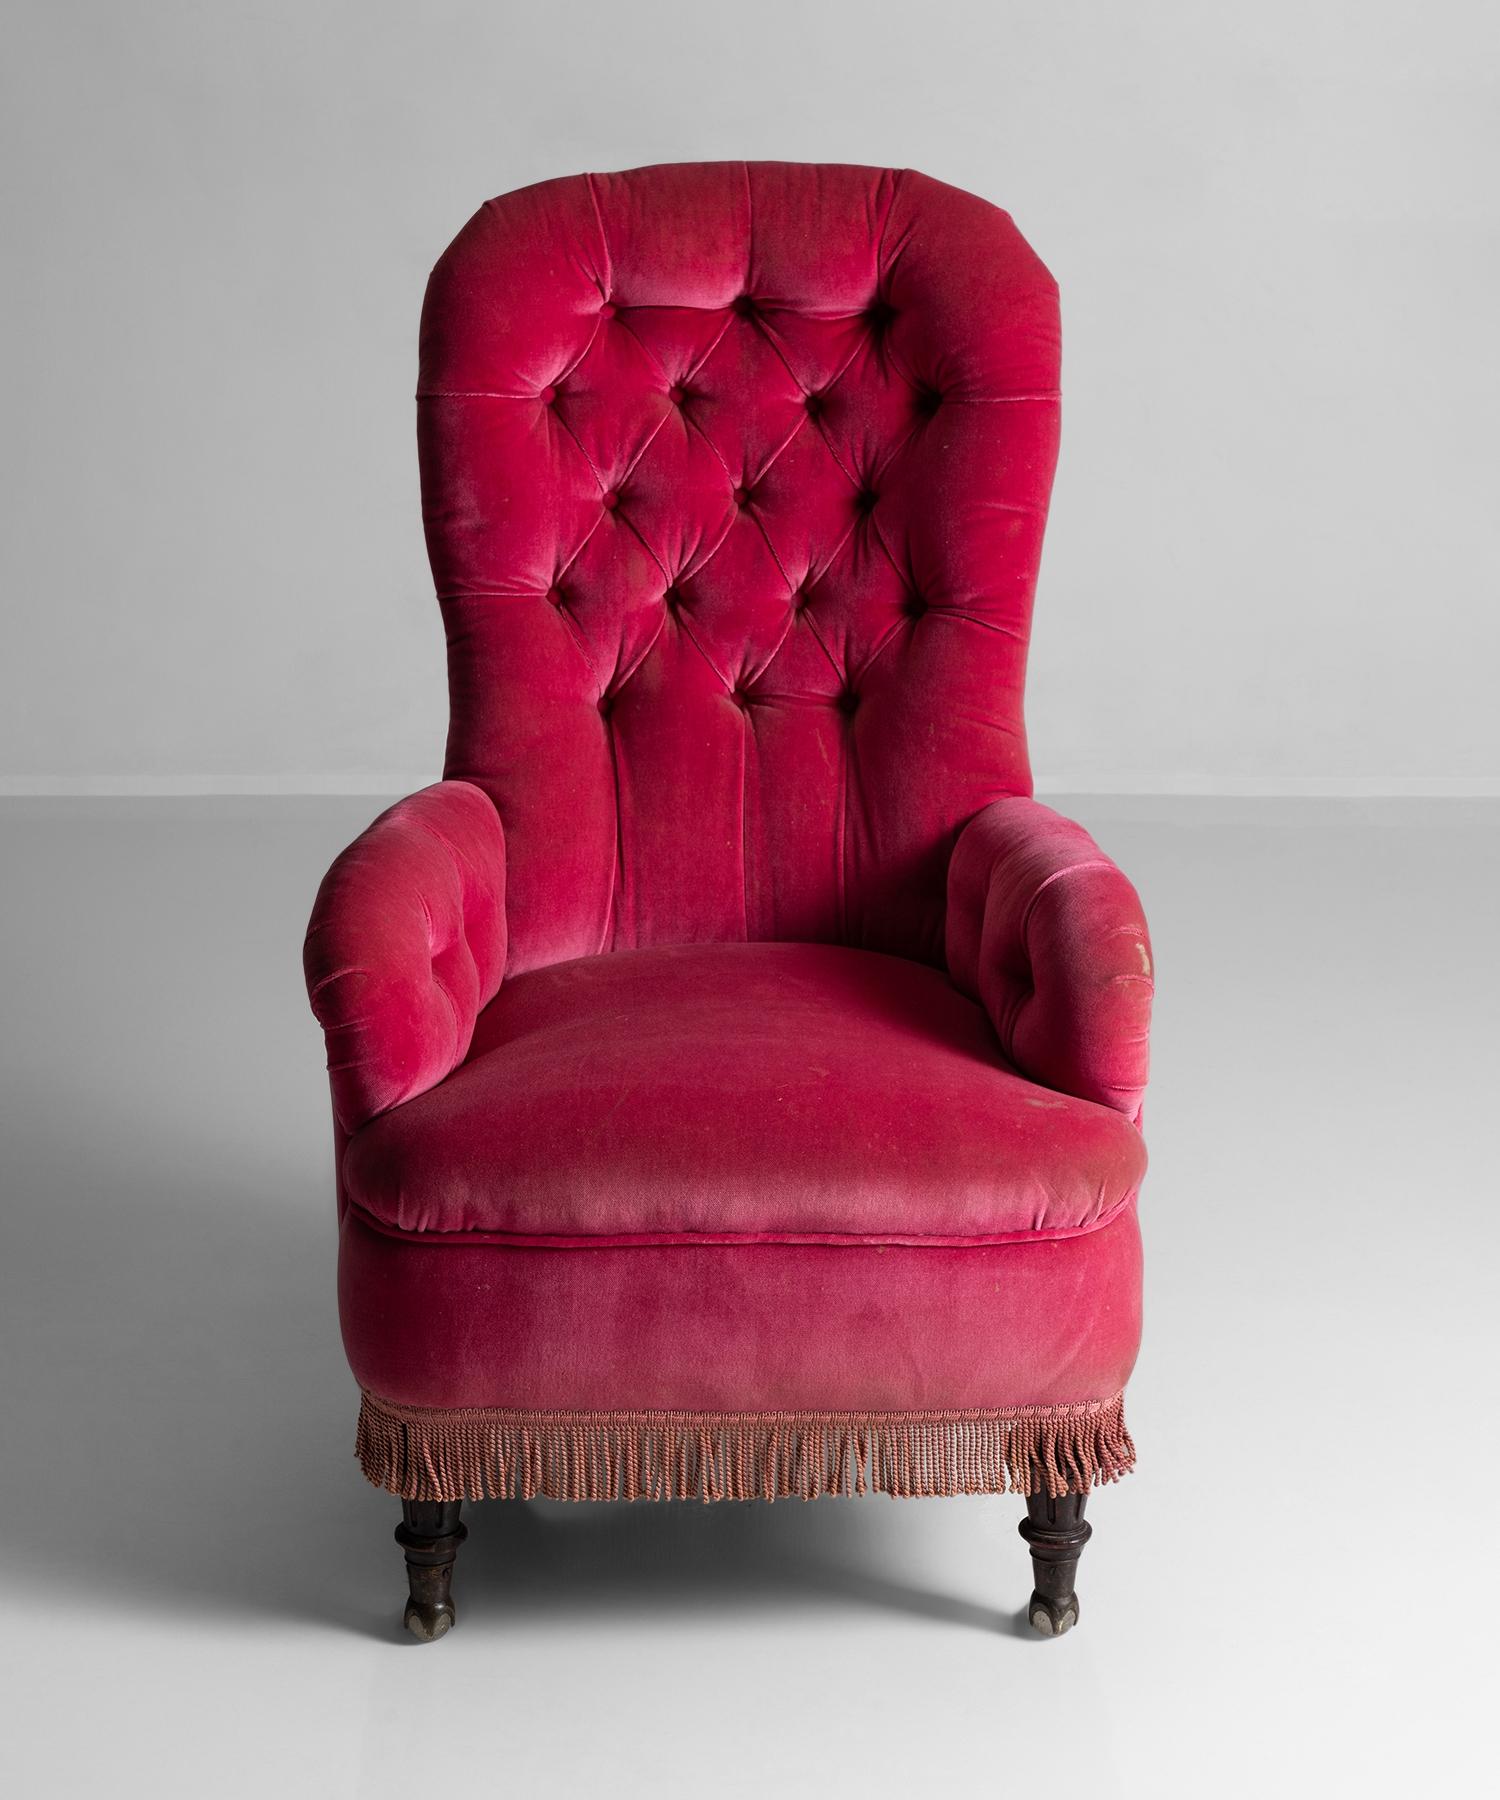 Button-back armchair upholstered in pink velvet with tasseled base, and oak turned front feet on original glass and brass castors.

Measures: 27” W x 26” D x 47” H x 17” seat.
 